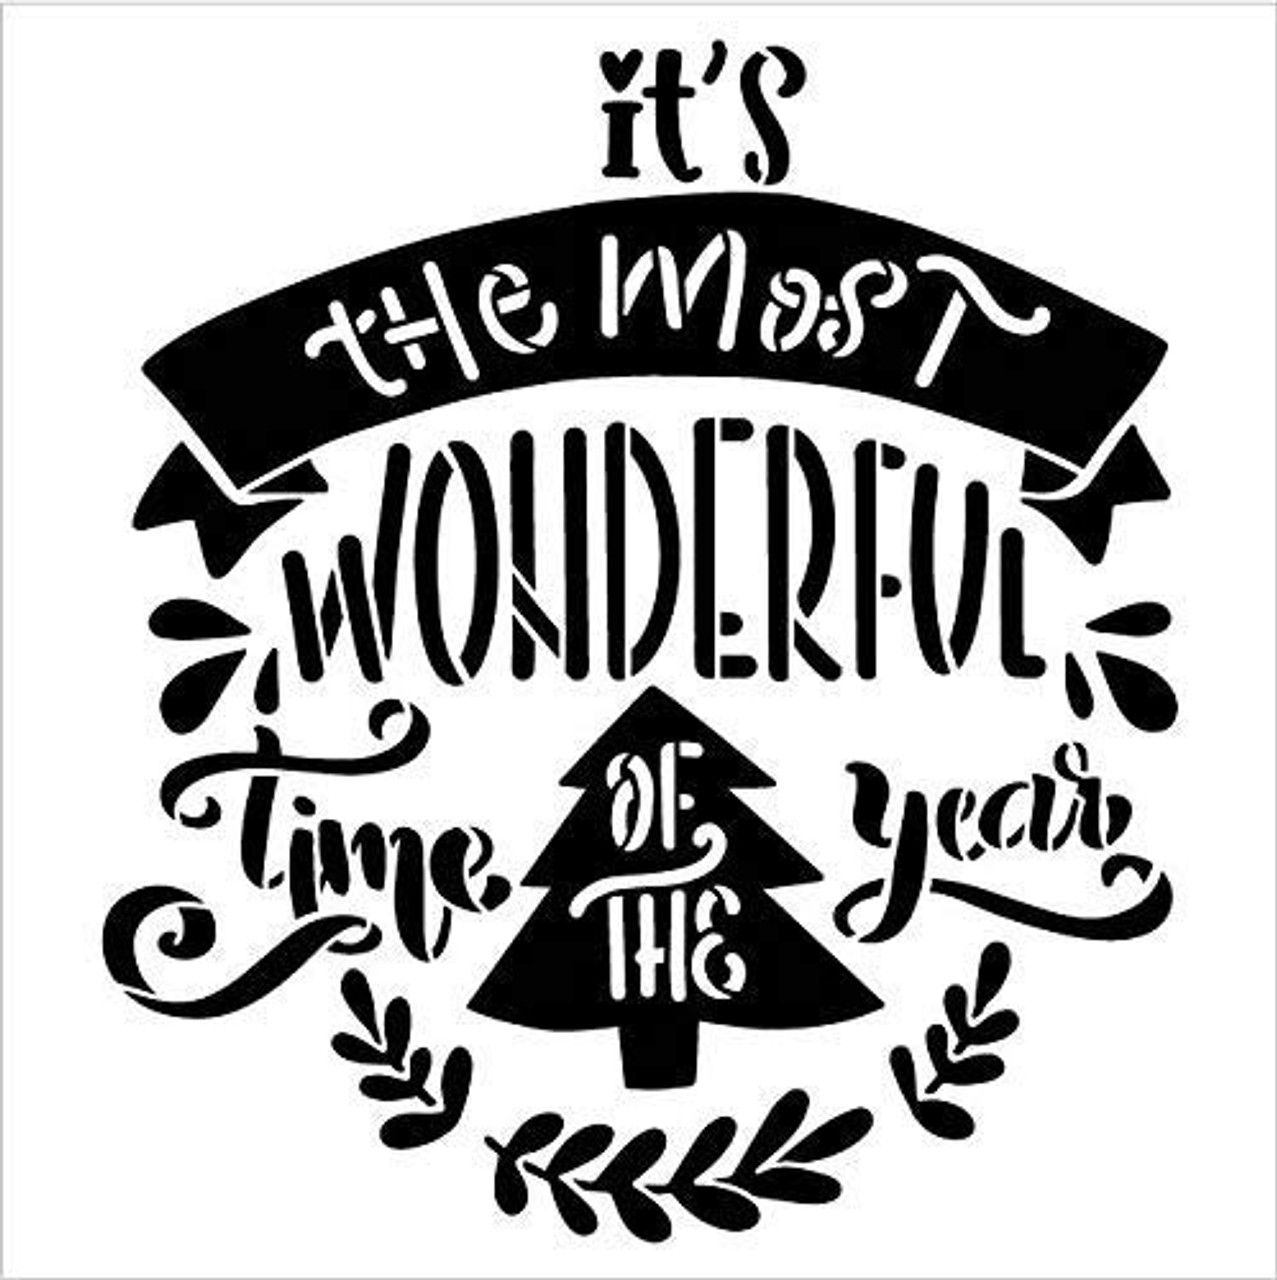 Most Wonderful Time of The Year 2-Part Stencil with Christmas Tree by StudioR12 | DIY Embellished Holiday Home Decor | Winter Song Lyric Art | Paint Wood Signs | Mylar Template | Size (9 x 9 inch)